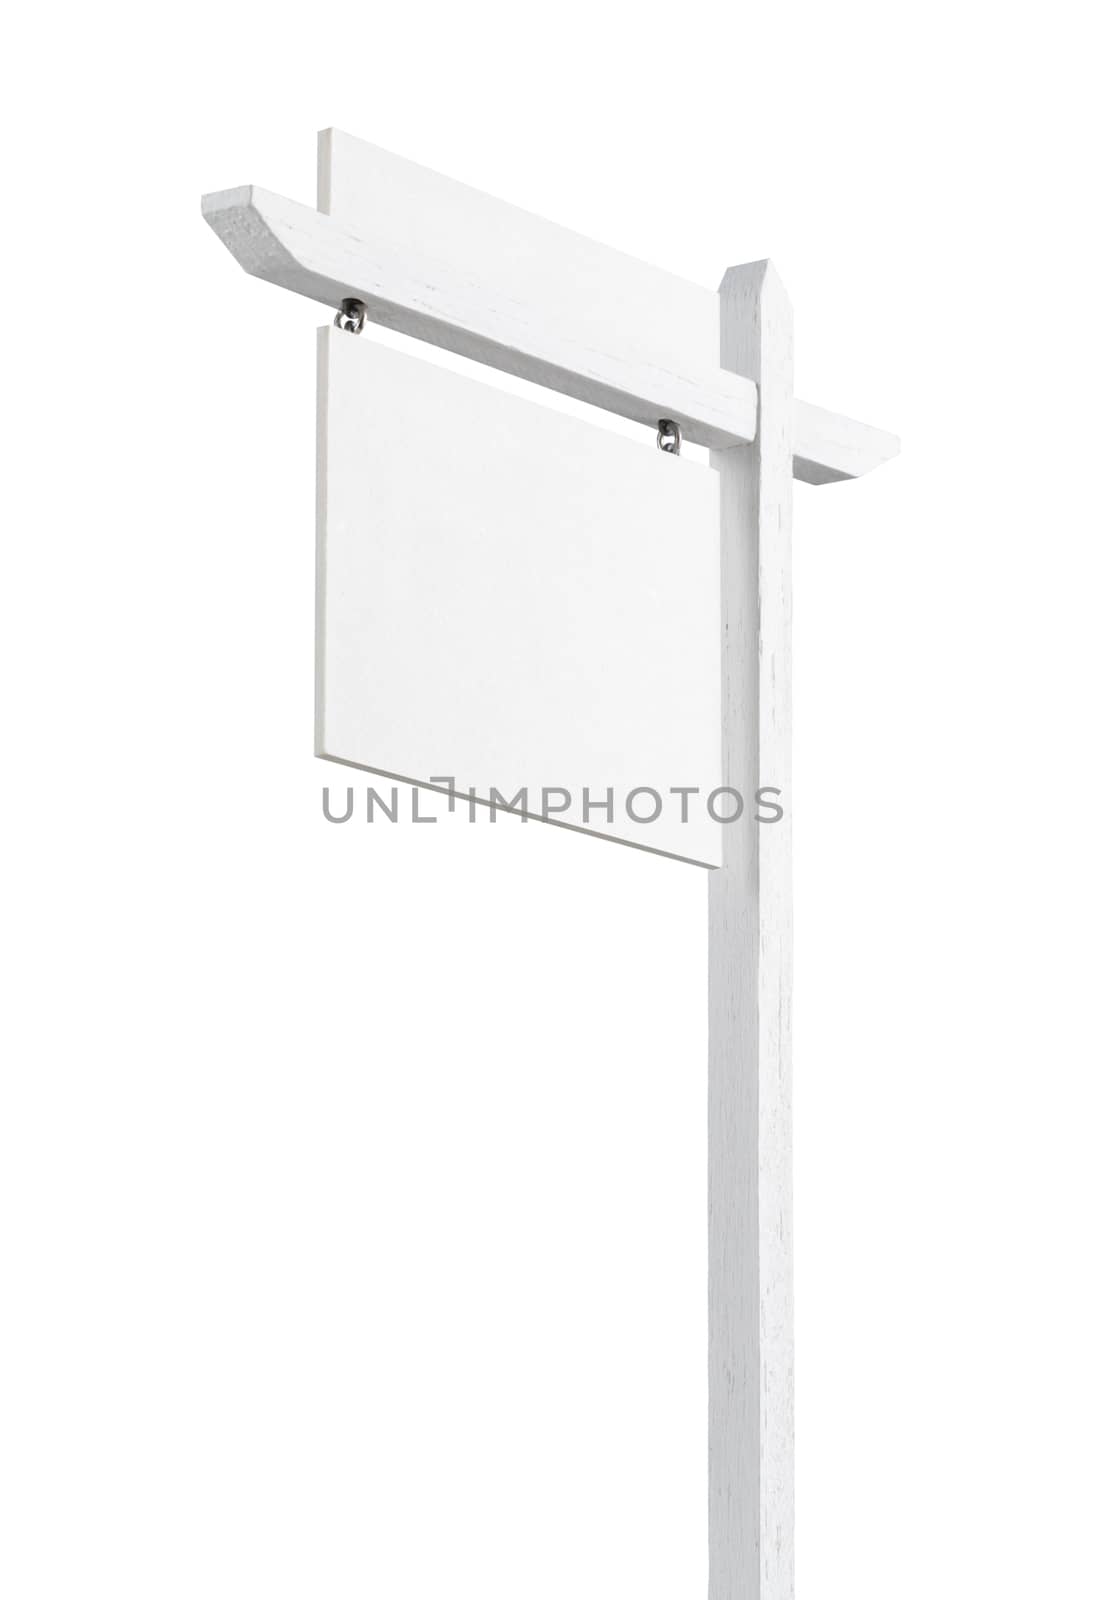 Blank Real Estate Sign with Upper Placard Ready For Your Own Text.